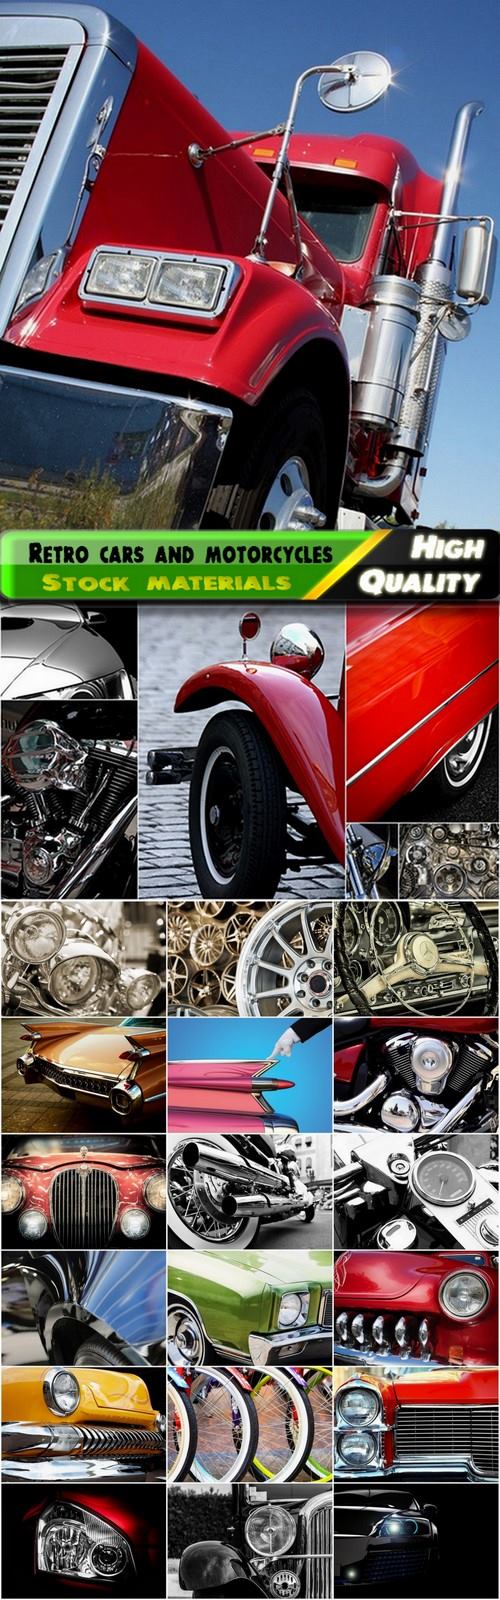 Set of retro cars and motorcycles Stock images - 25 HQ Jpg